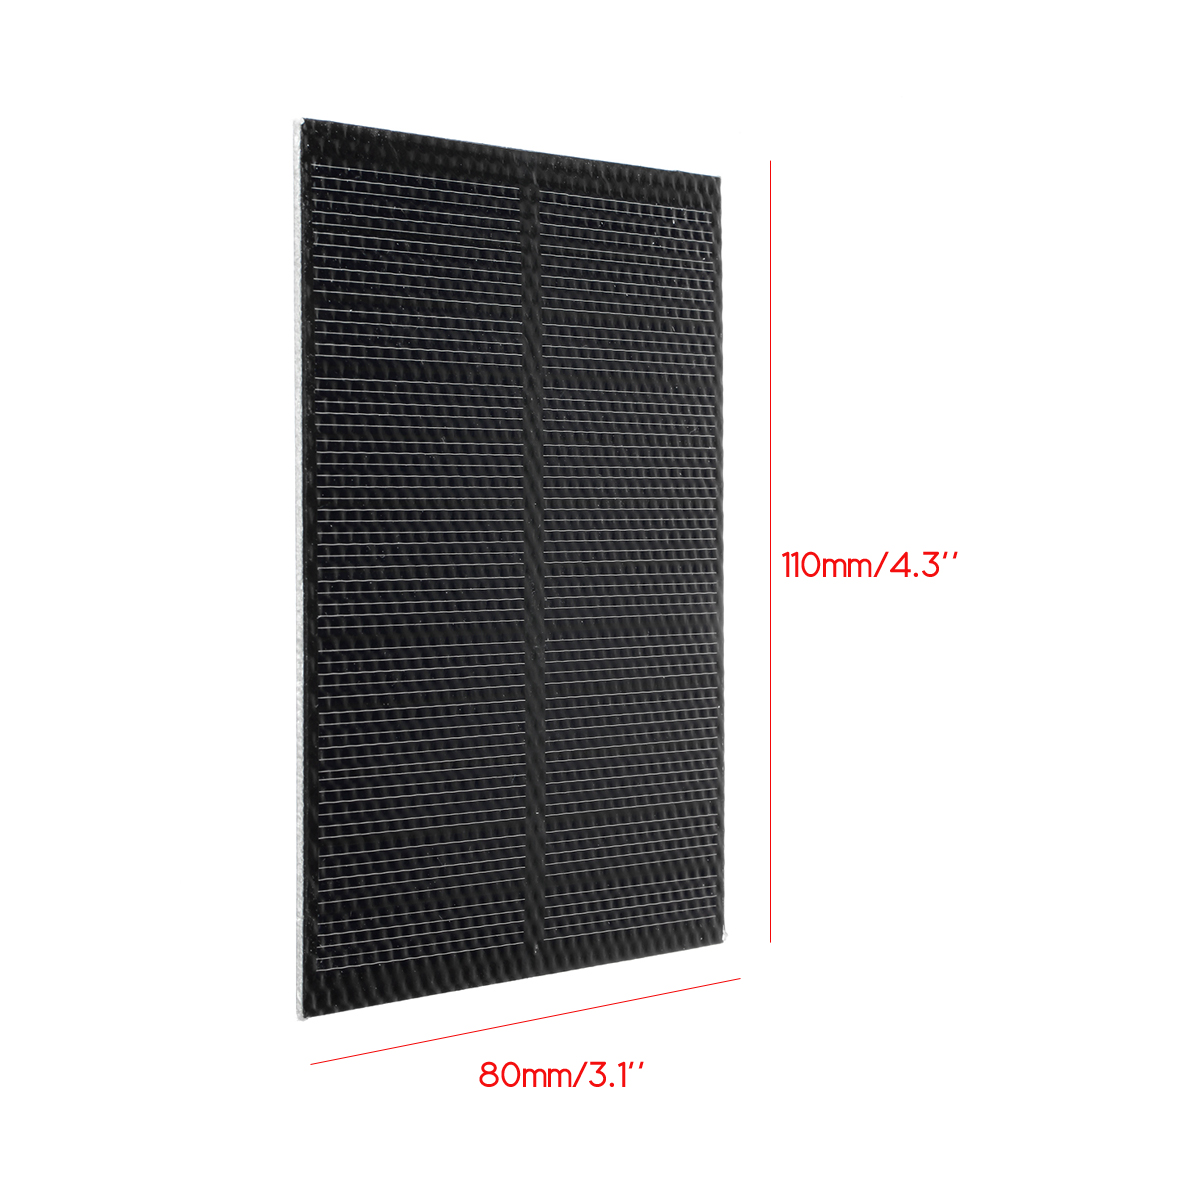 10-PCS-110times-80mm-ETFE-Mini-Solar-Cell-With-Bottom-Plate-Mono-Solar-Panel-Solar-Battery-Charger-S-1935844-9